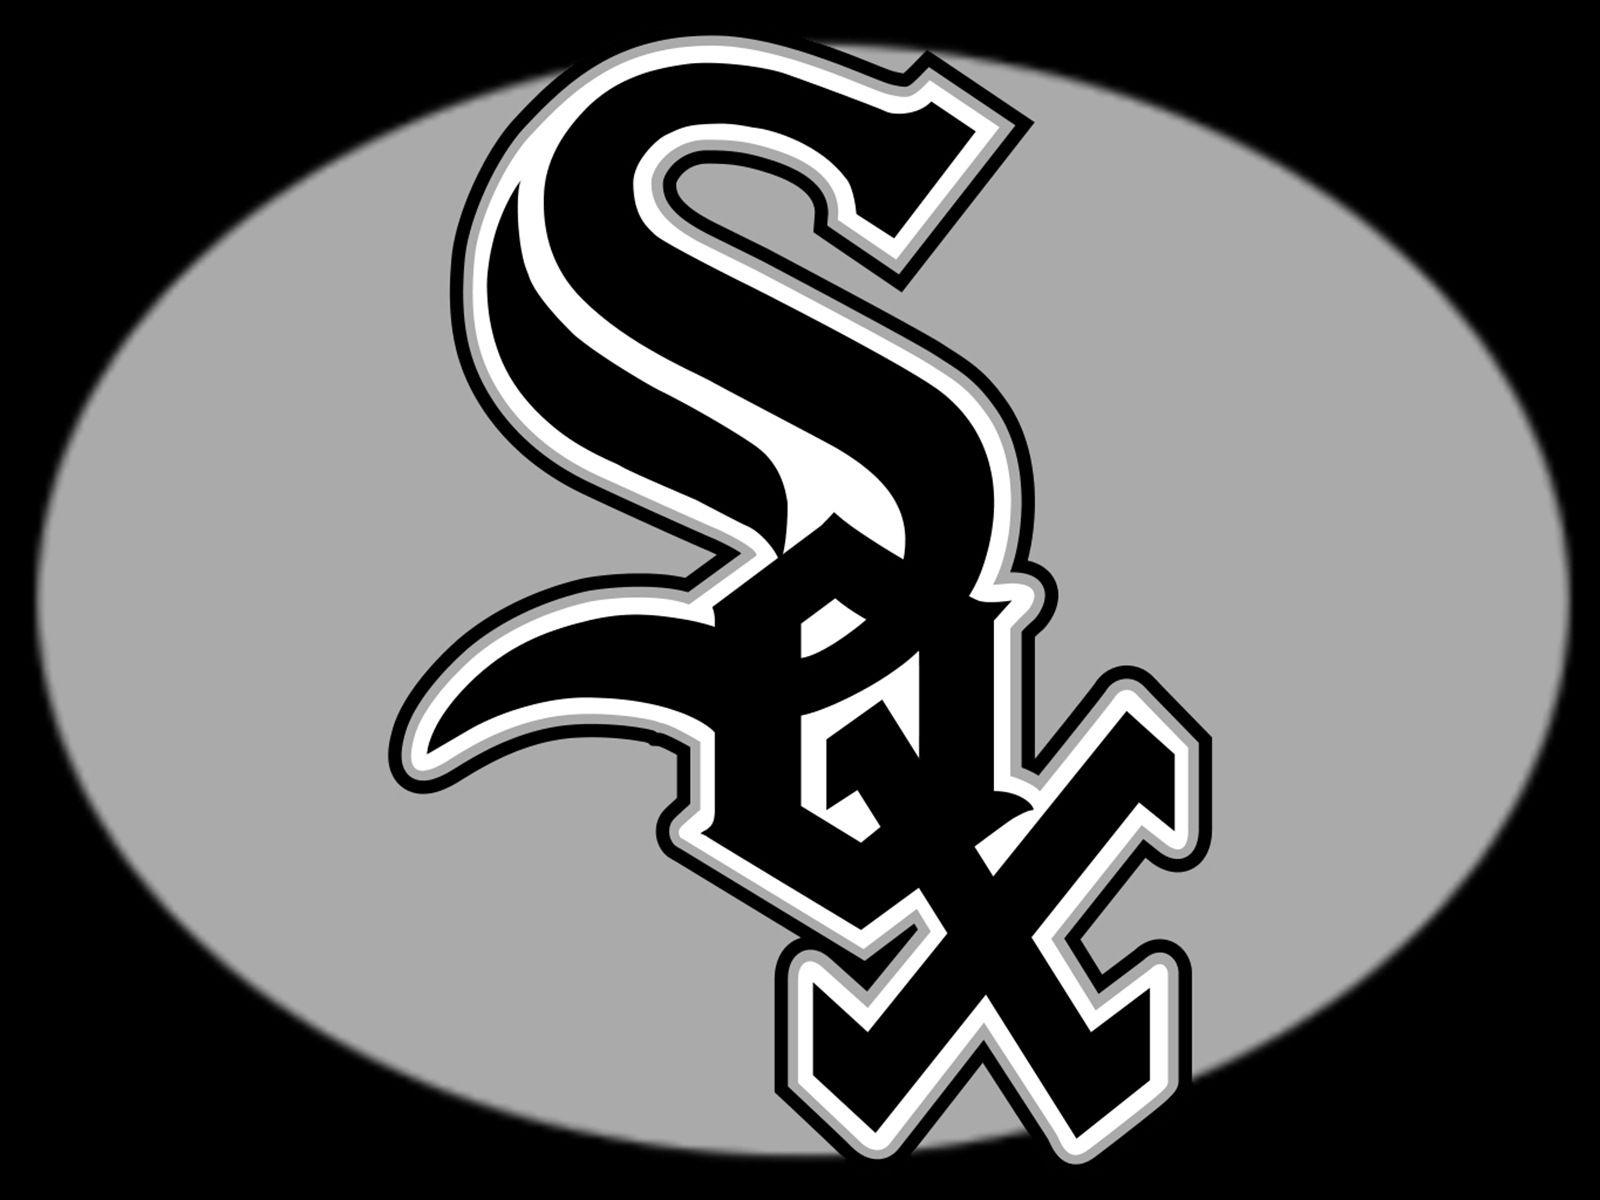 Chicago White Sox 2018 Wallpapers - Wallpaper Cave